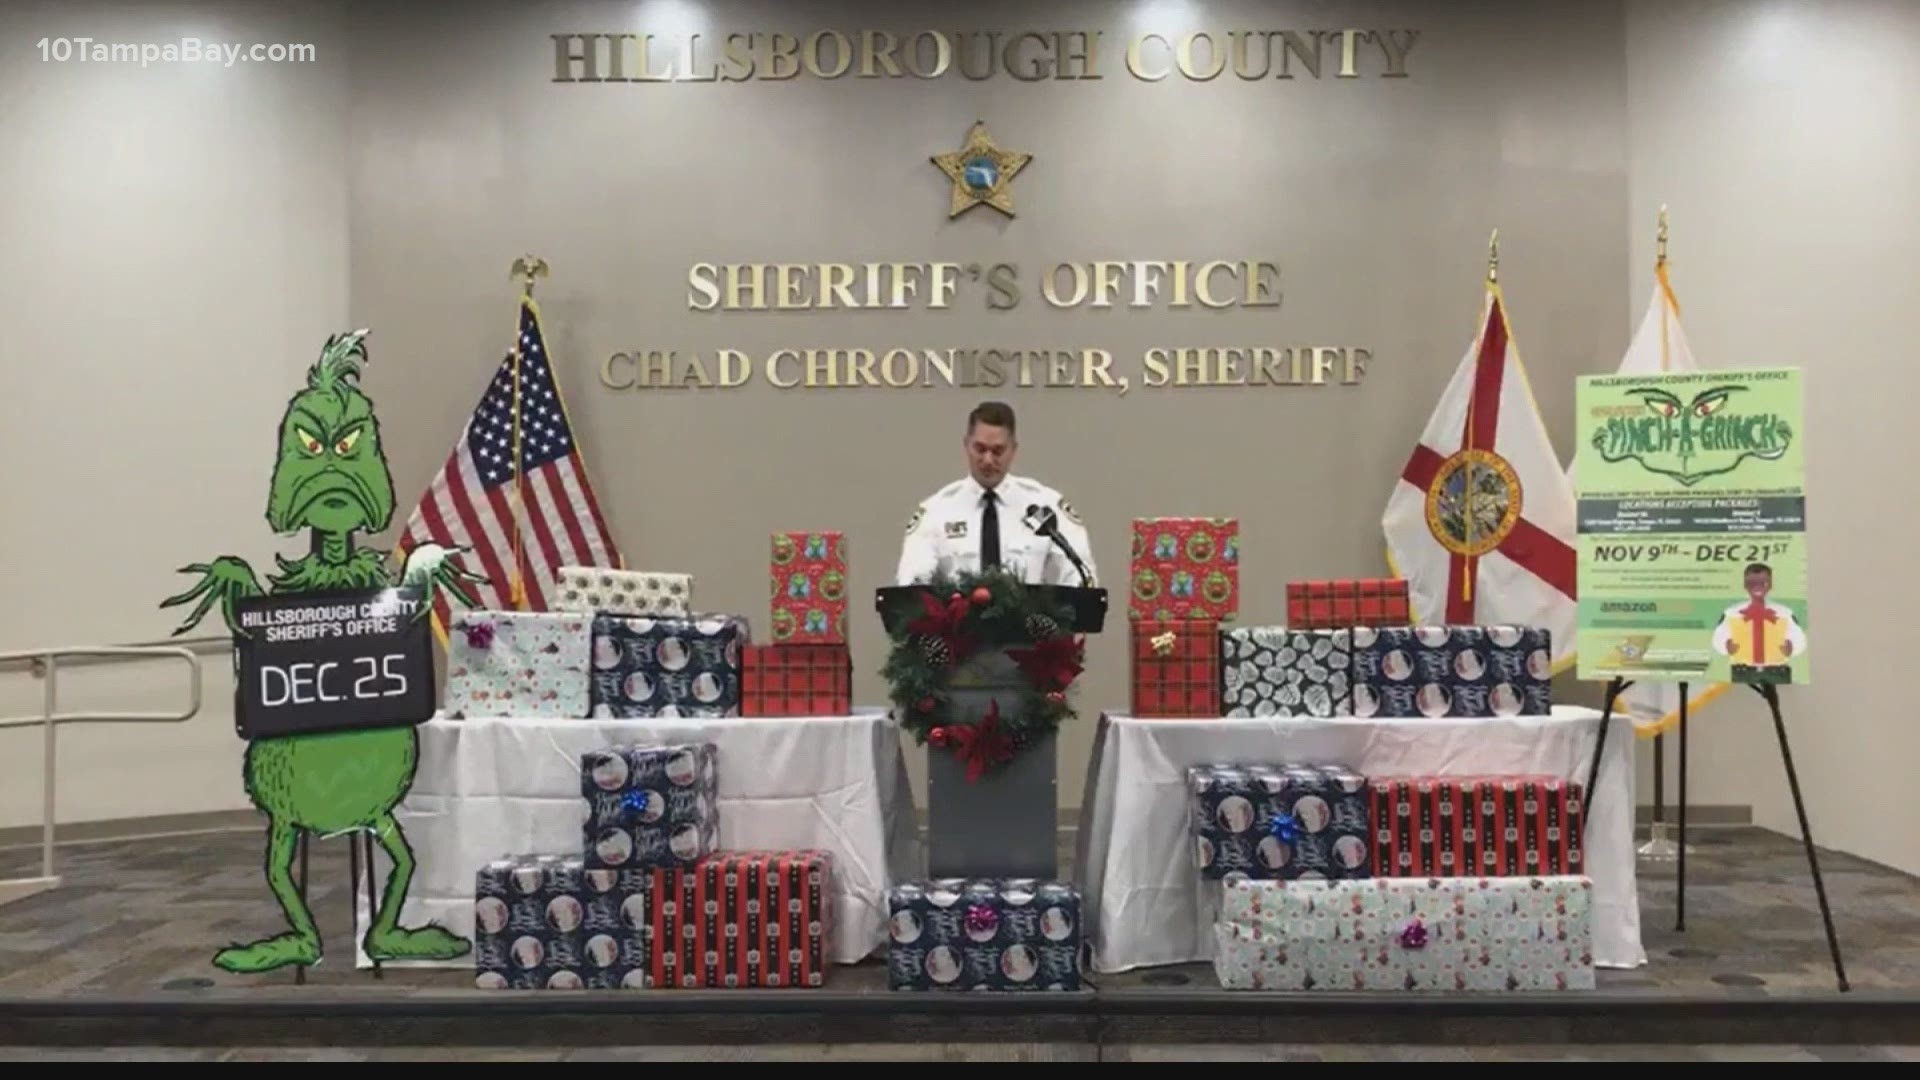 The sheriff's office will let residents have packages shipped to designated offices to be picked up later.